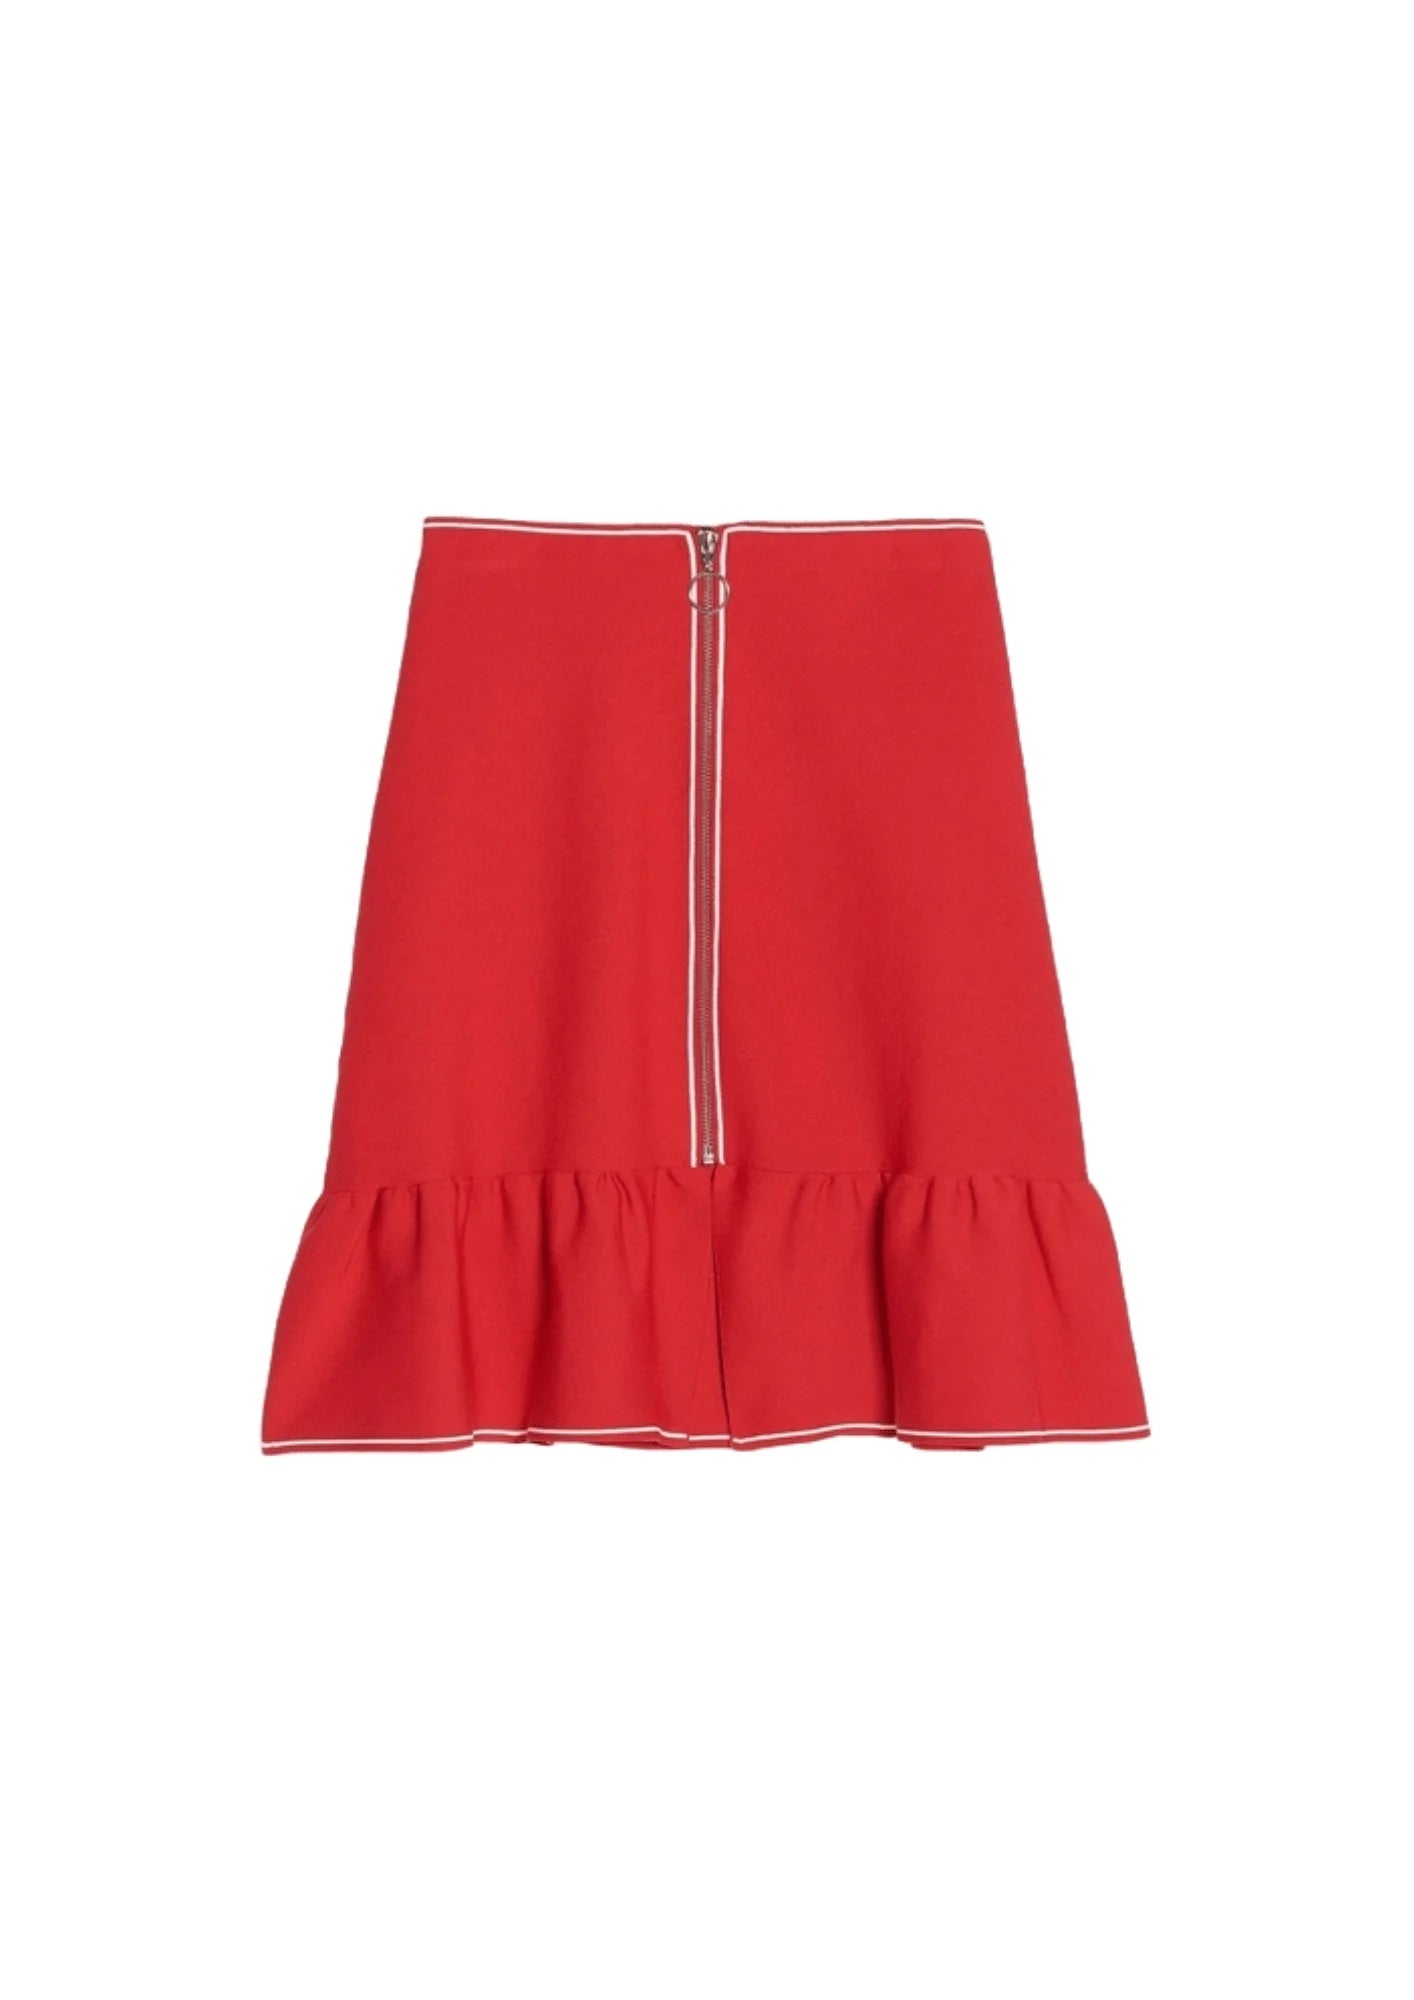 RED A-LINE SKIRT